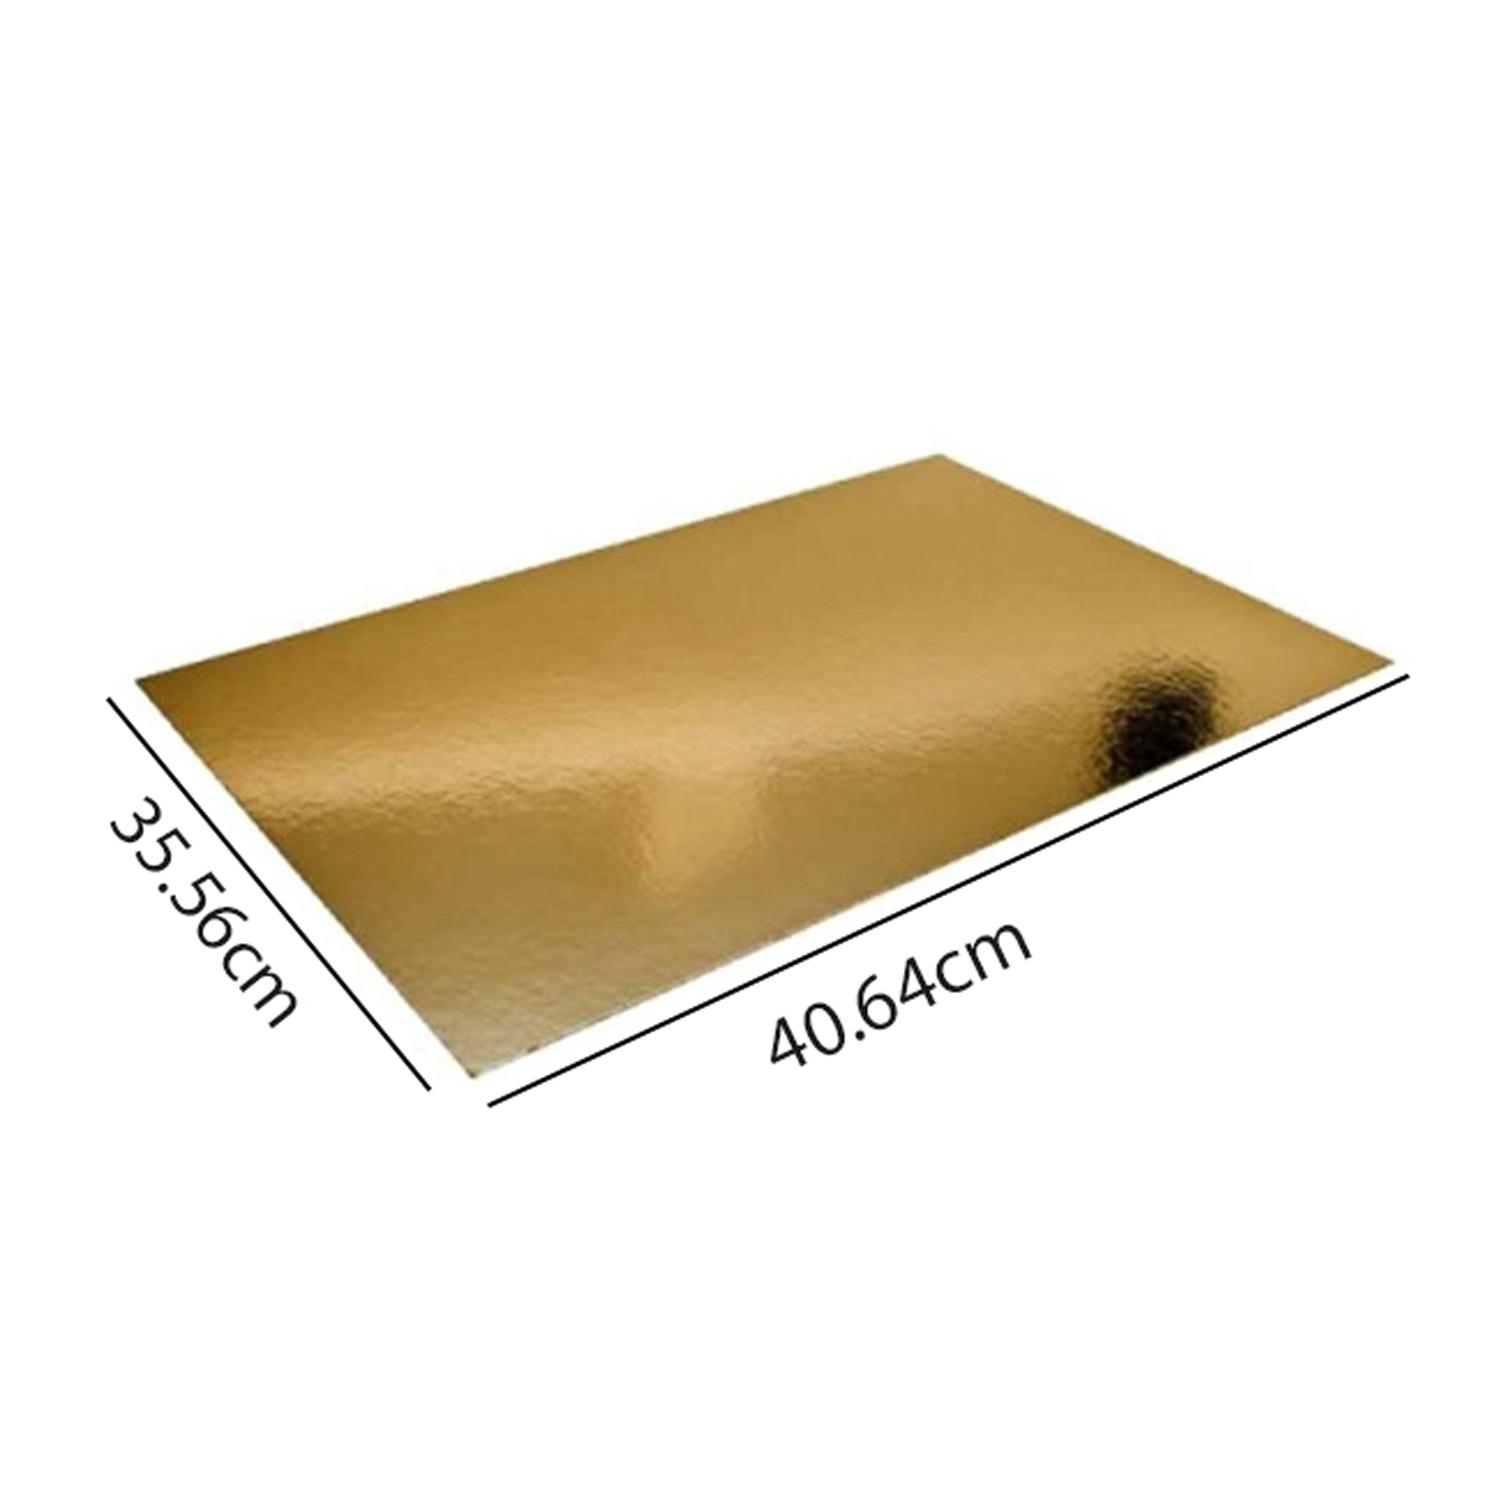 14'' X 16'' RECTANGLE SMOOTH GOLD CAKE BOARD